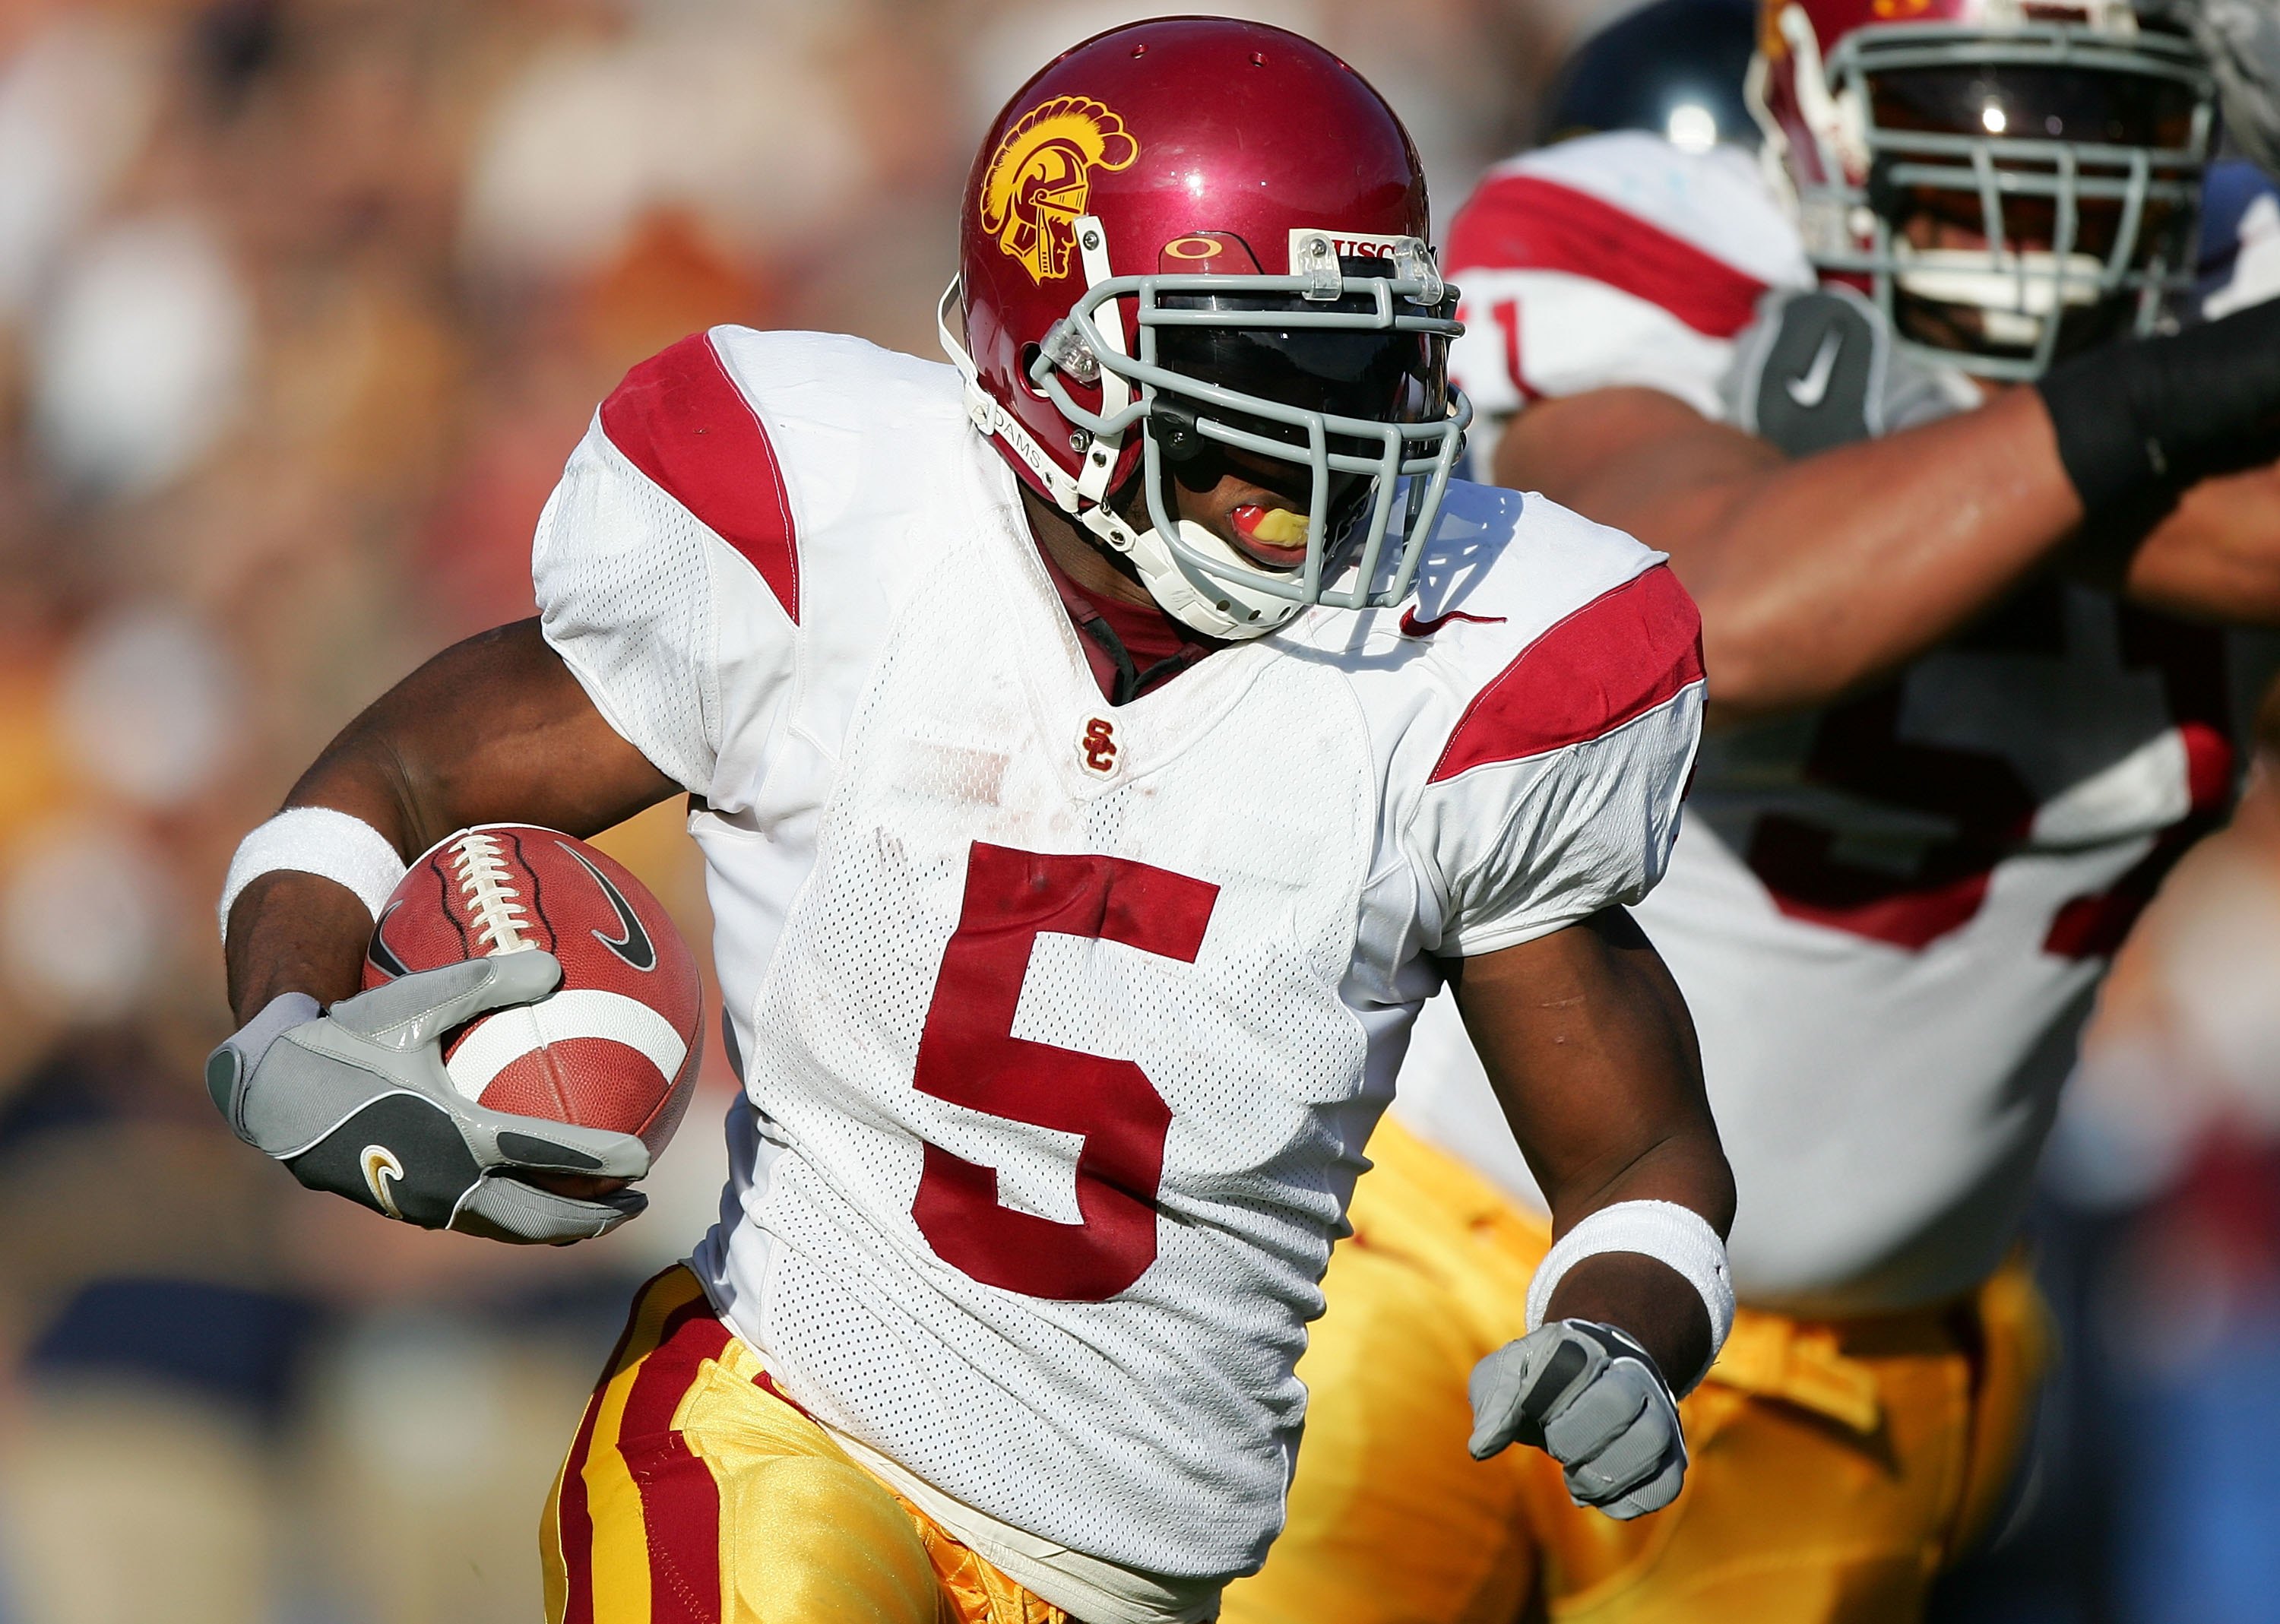 BERKELEY, CA - NOVEMBER 12:  (FILE PHOTO) Reggie Bush #5 of the USC Trojans runs with the ball against the California Golden Bears at Memorial Stadium on November 12th, 2005 in Berkeley, California. Bush was picked second overall by the New Orleans Saints